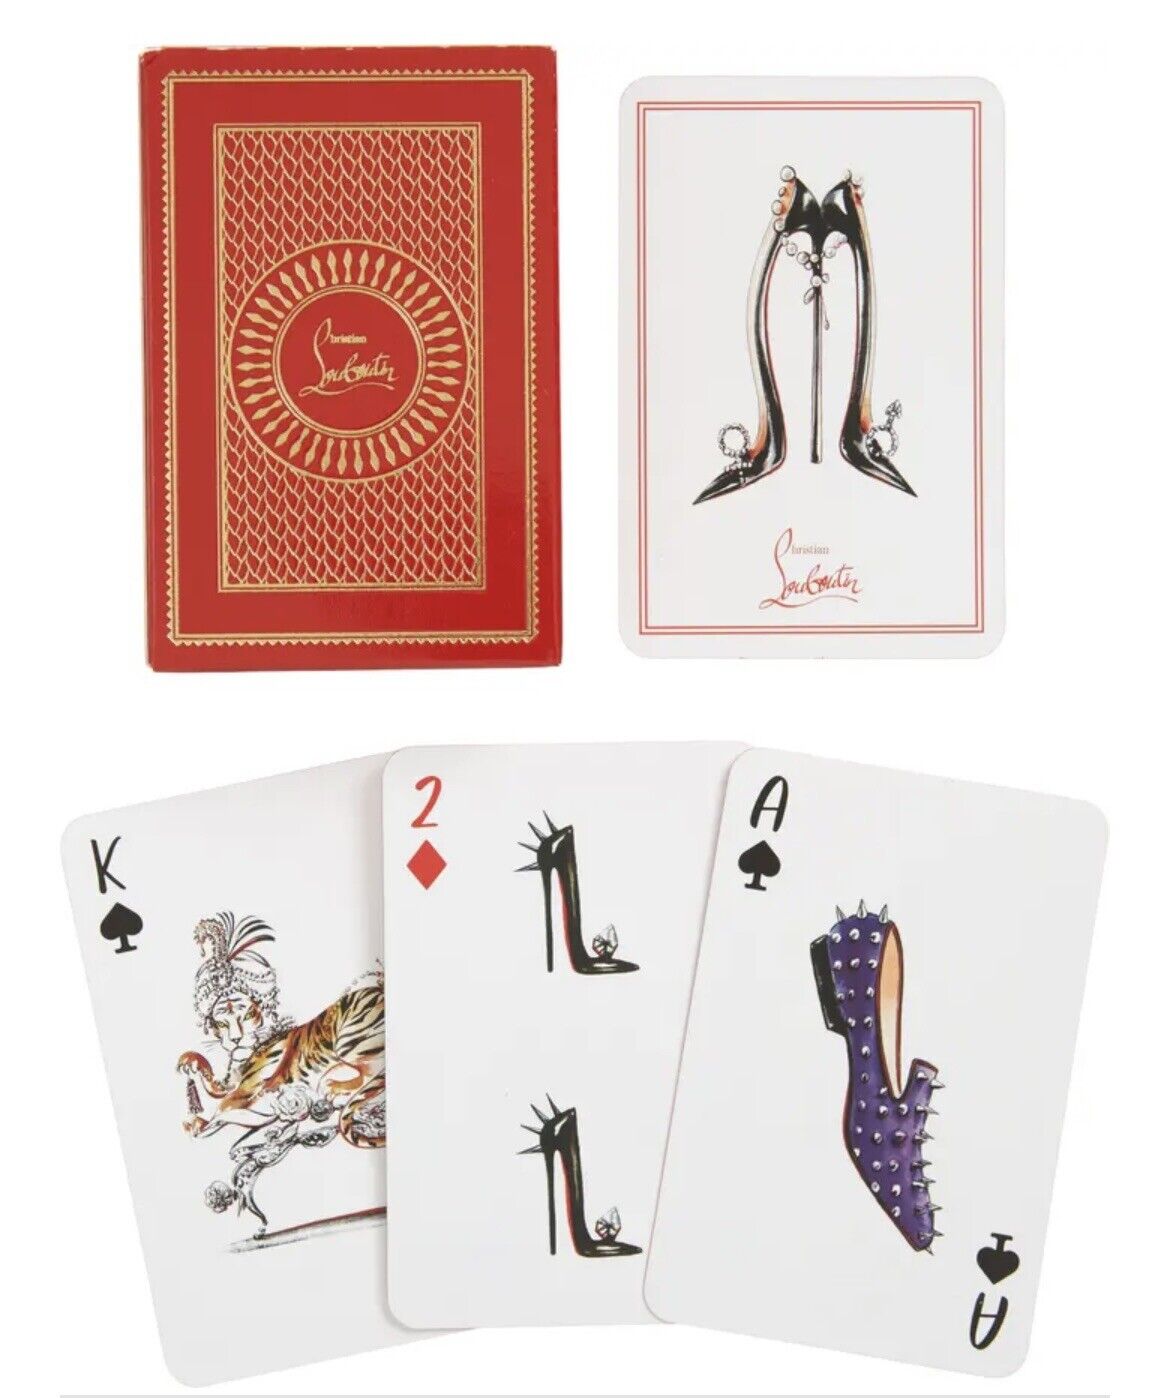 NEW CHRISTIAN LOUBOUTIN Deck of Playing cards 